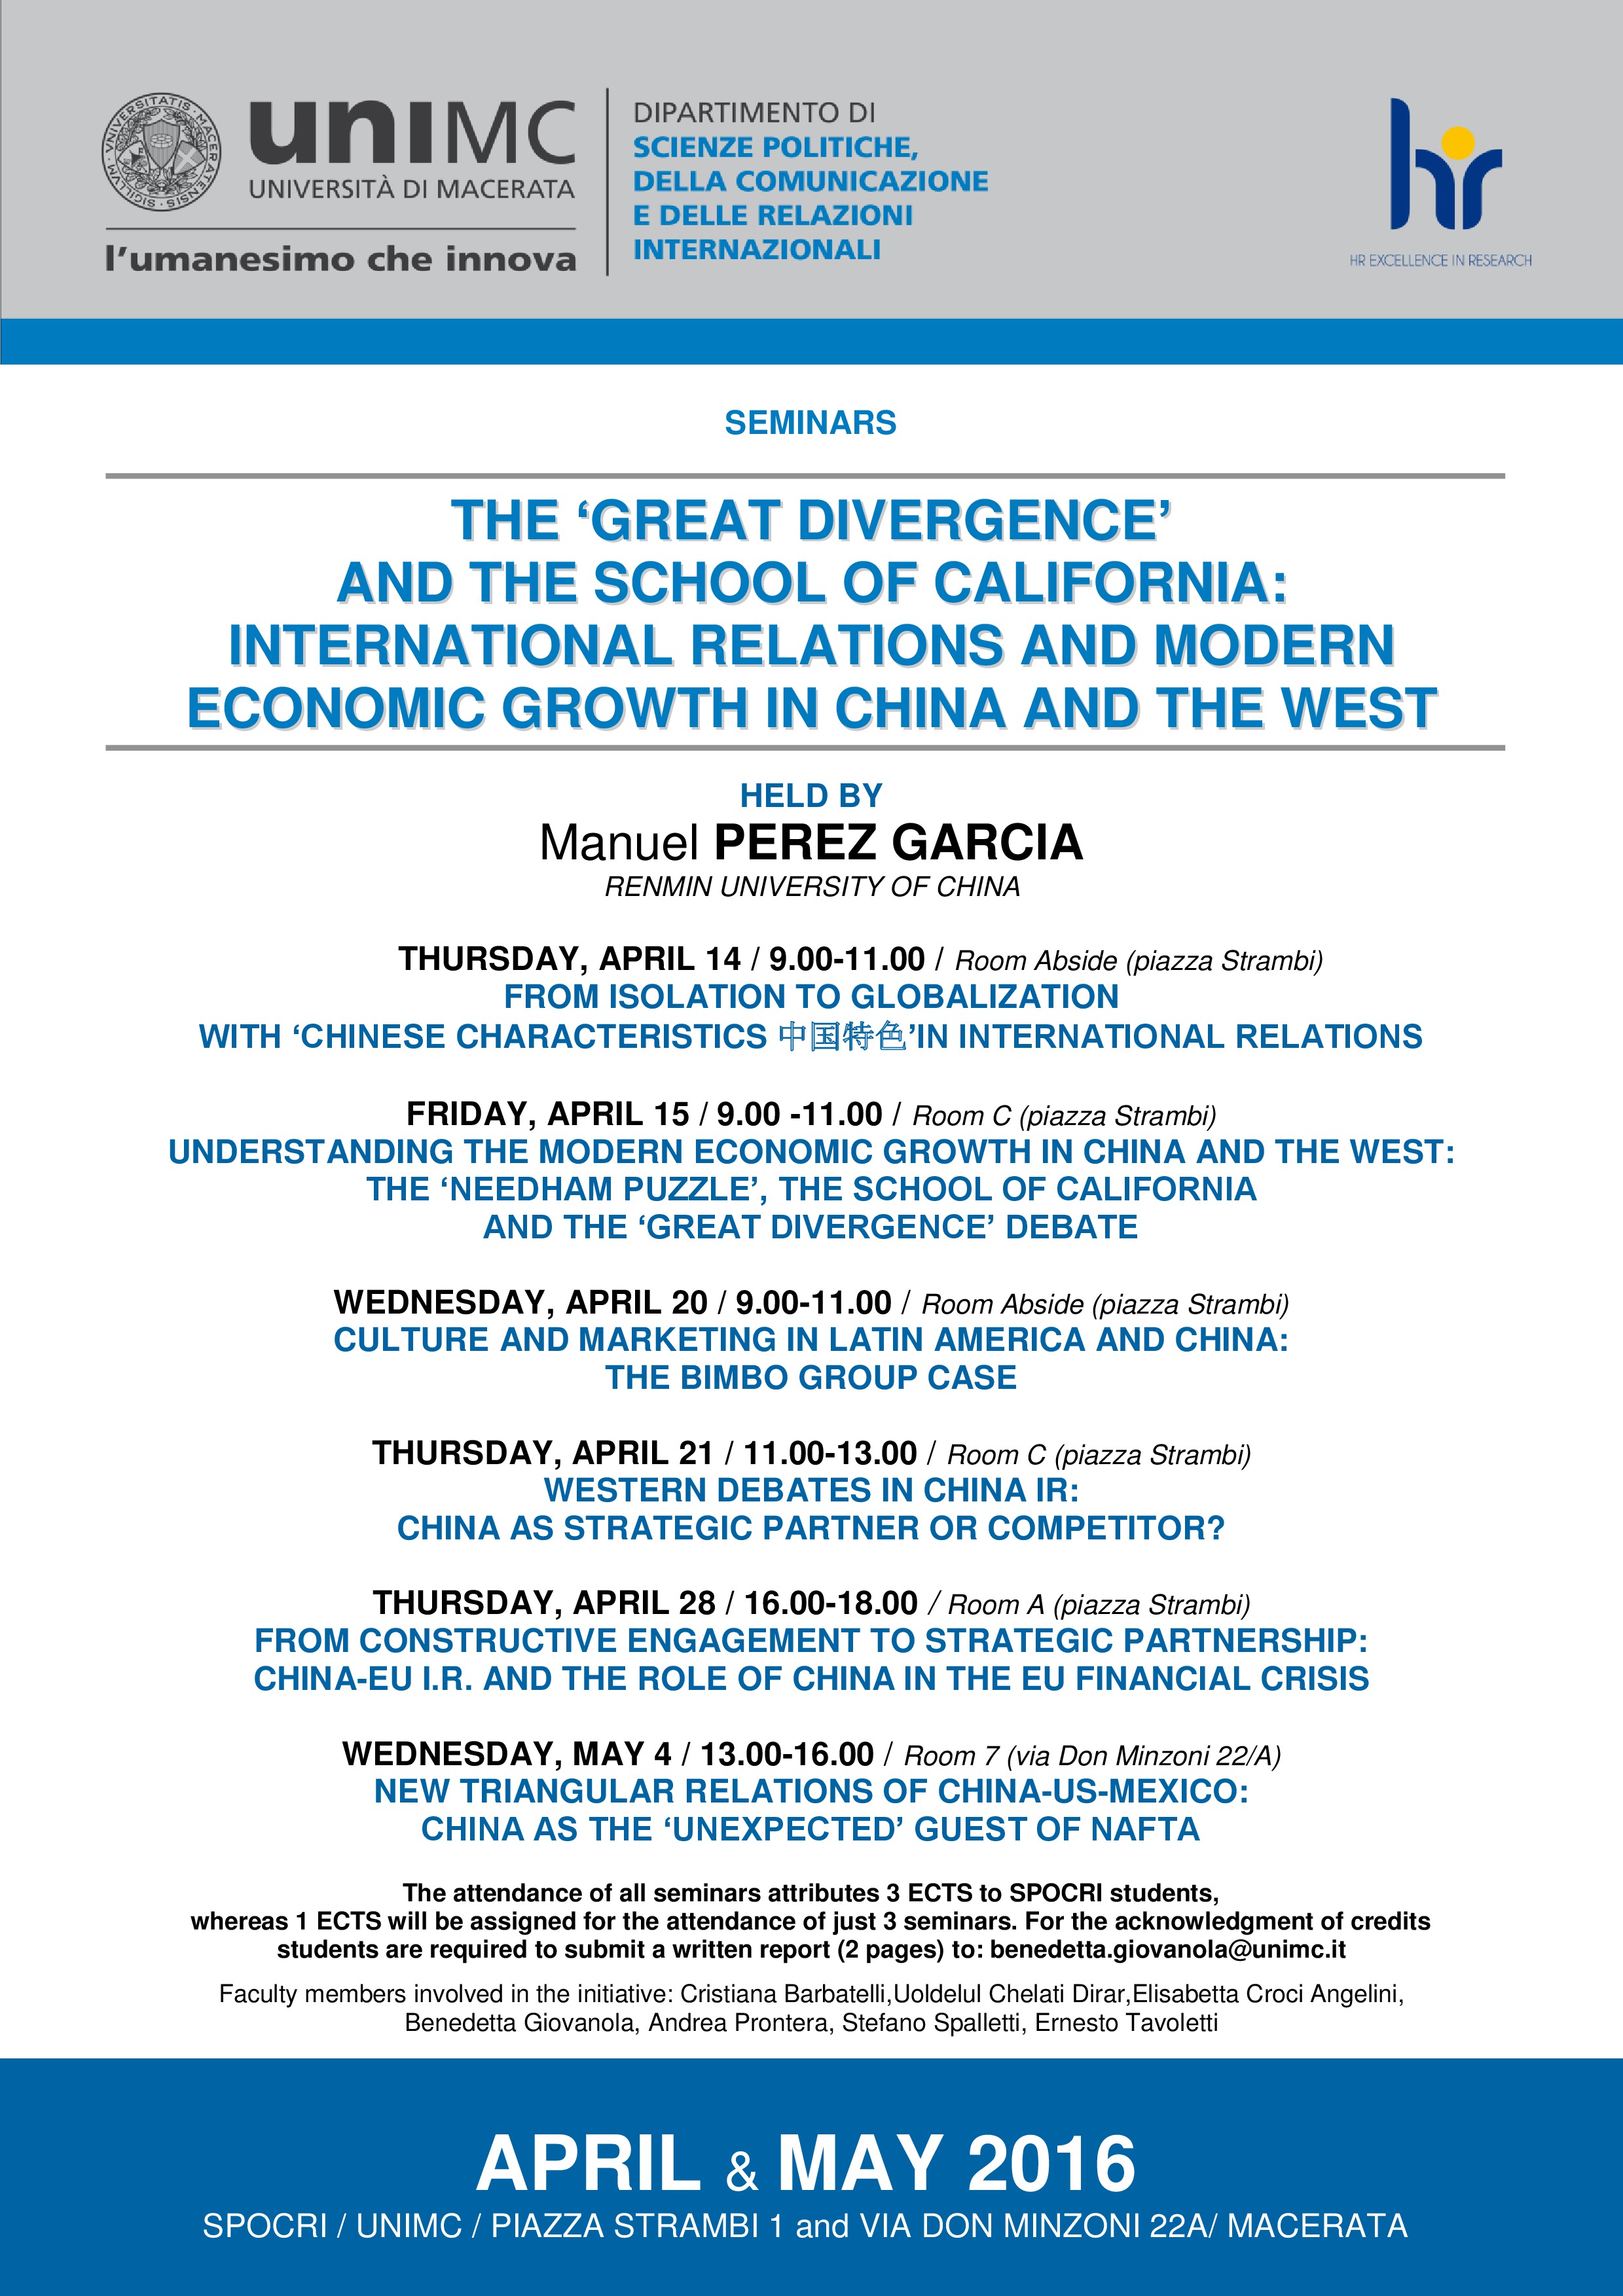 SEMINARS. The "Great Divergence" and the School of California: international relations and modern economic growth in China and the West 